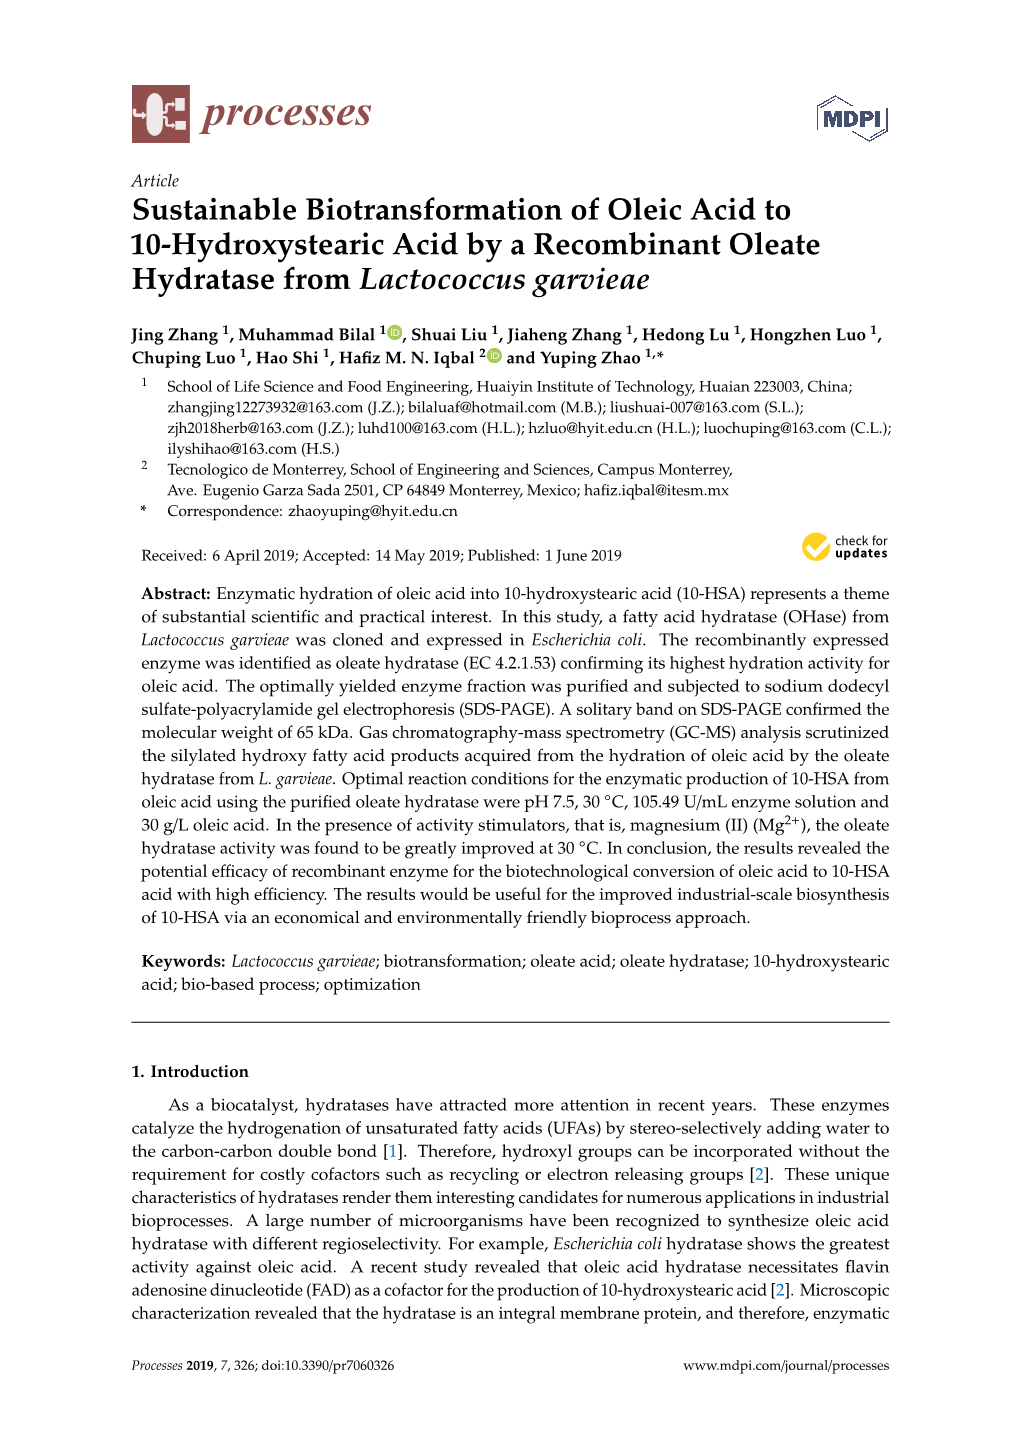 Sustainable Biotransformation of Oleic Acid to 10-Hydroxystearic Acid by a Recombinant Oleate Hydratase from Lactococcus Garvieae